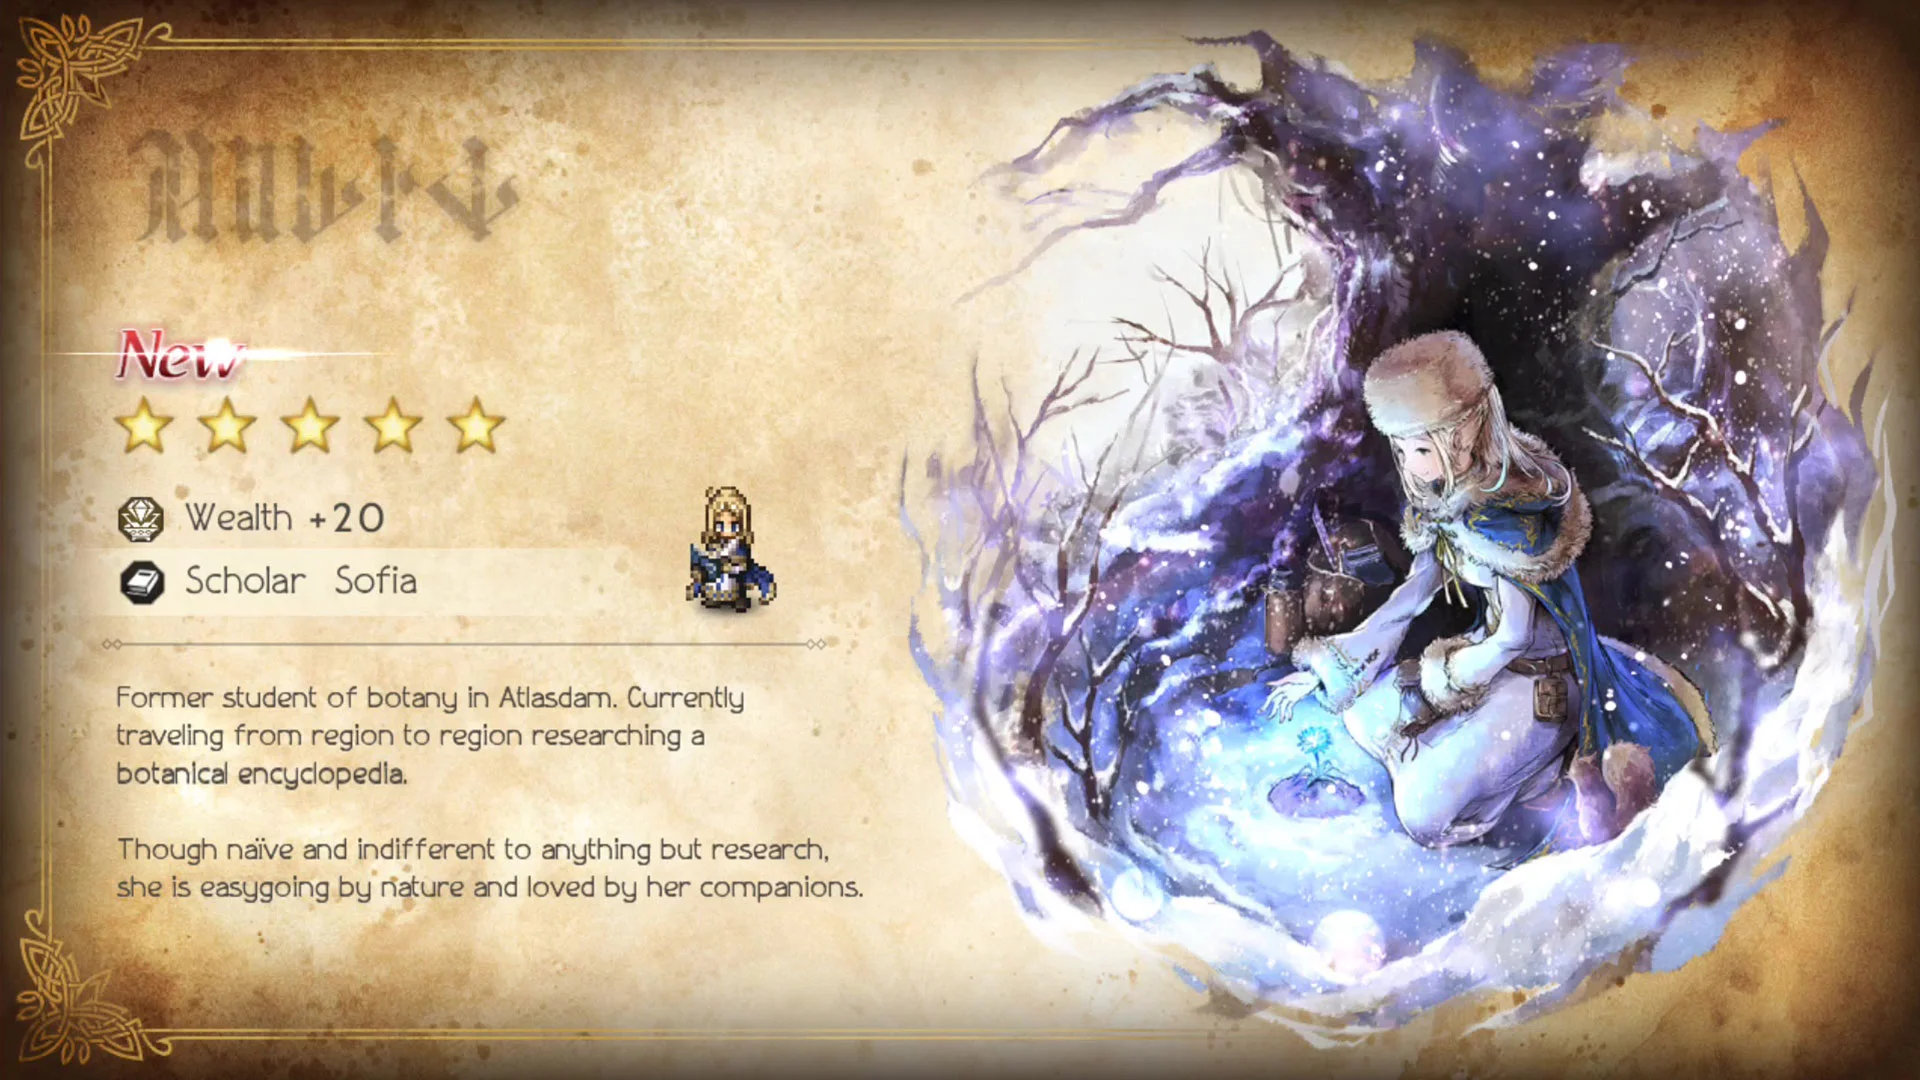 Octopath Traveler: Champions of the Continent now available on